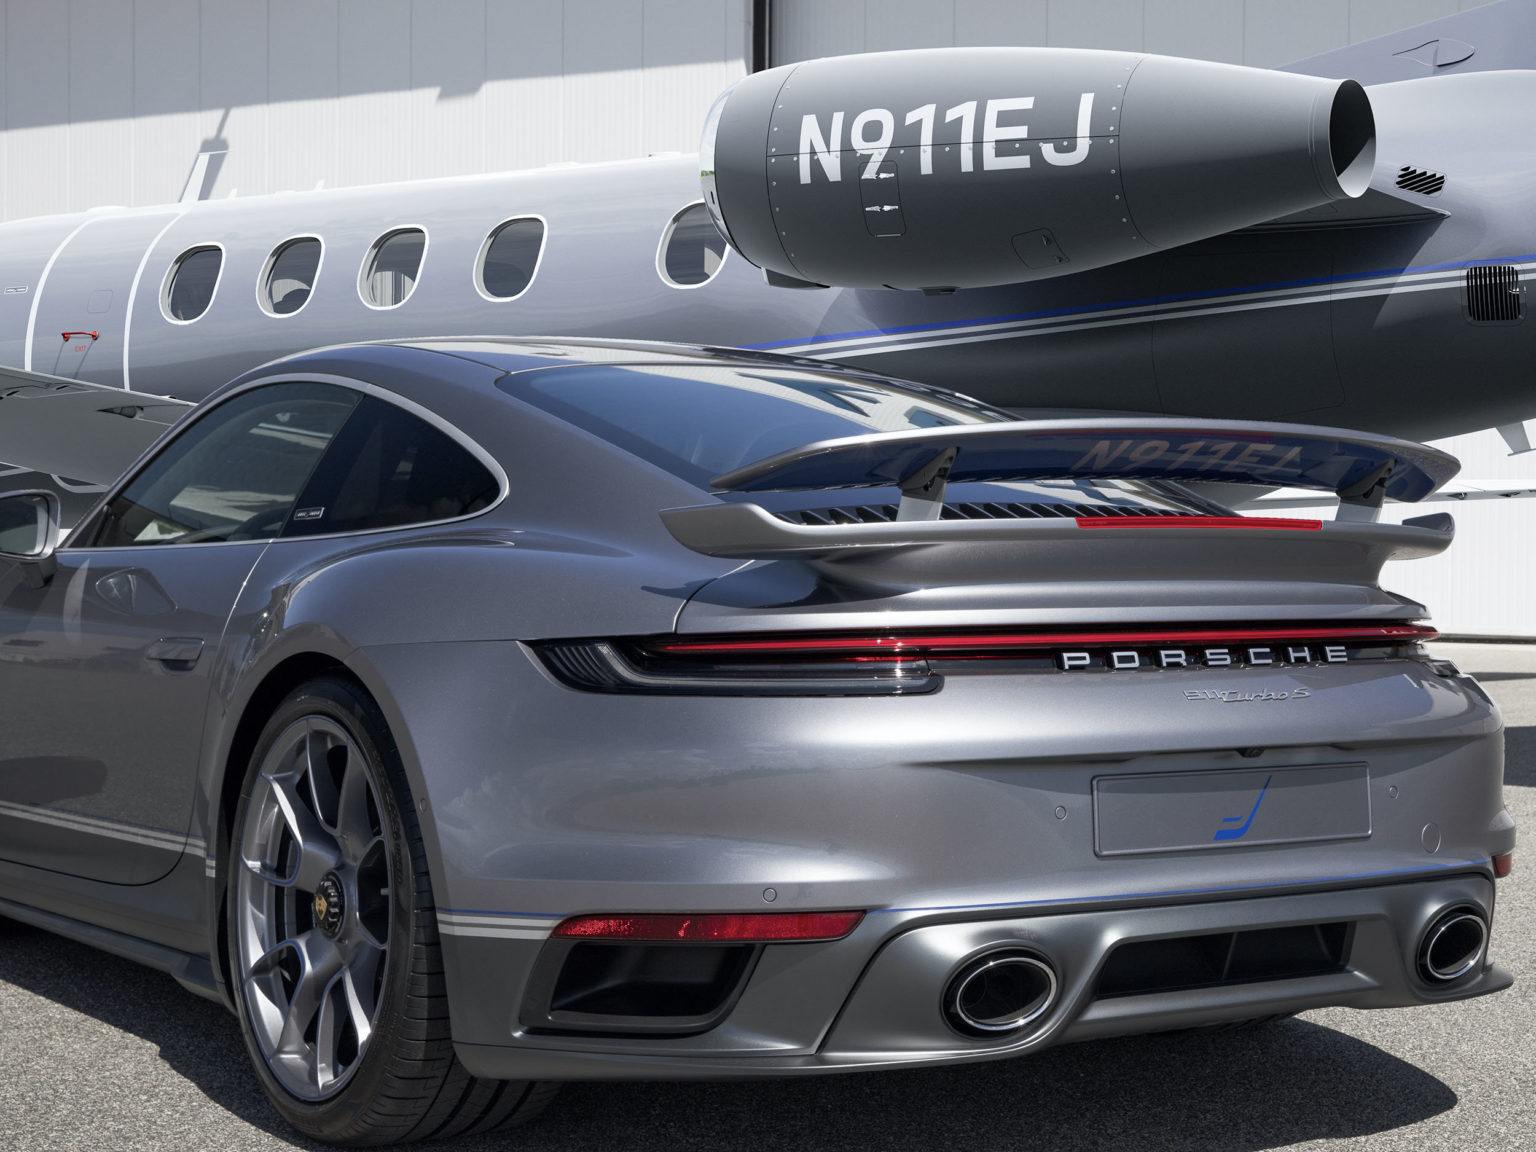 Customers who opt for a special edition Embraer Phenom 300E business jet can also buy a matching customised Porsche 911 Turbo S.